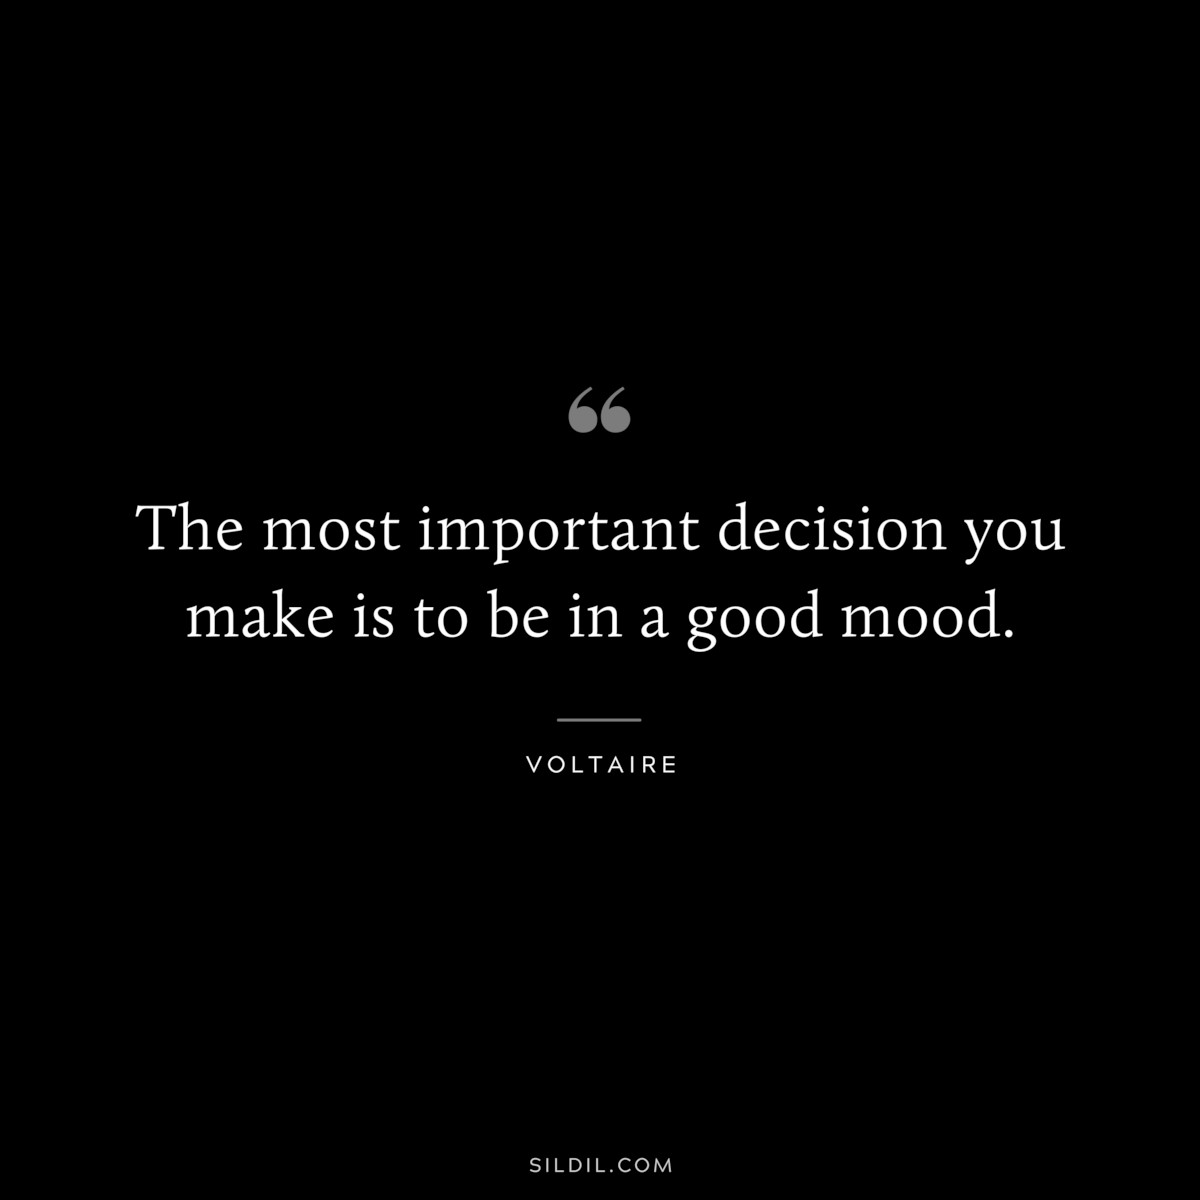 The most important decision you make is to be in a good mood. ― Voltaire